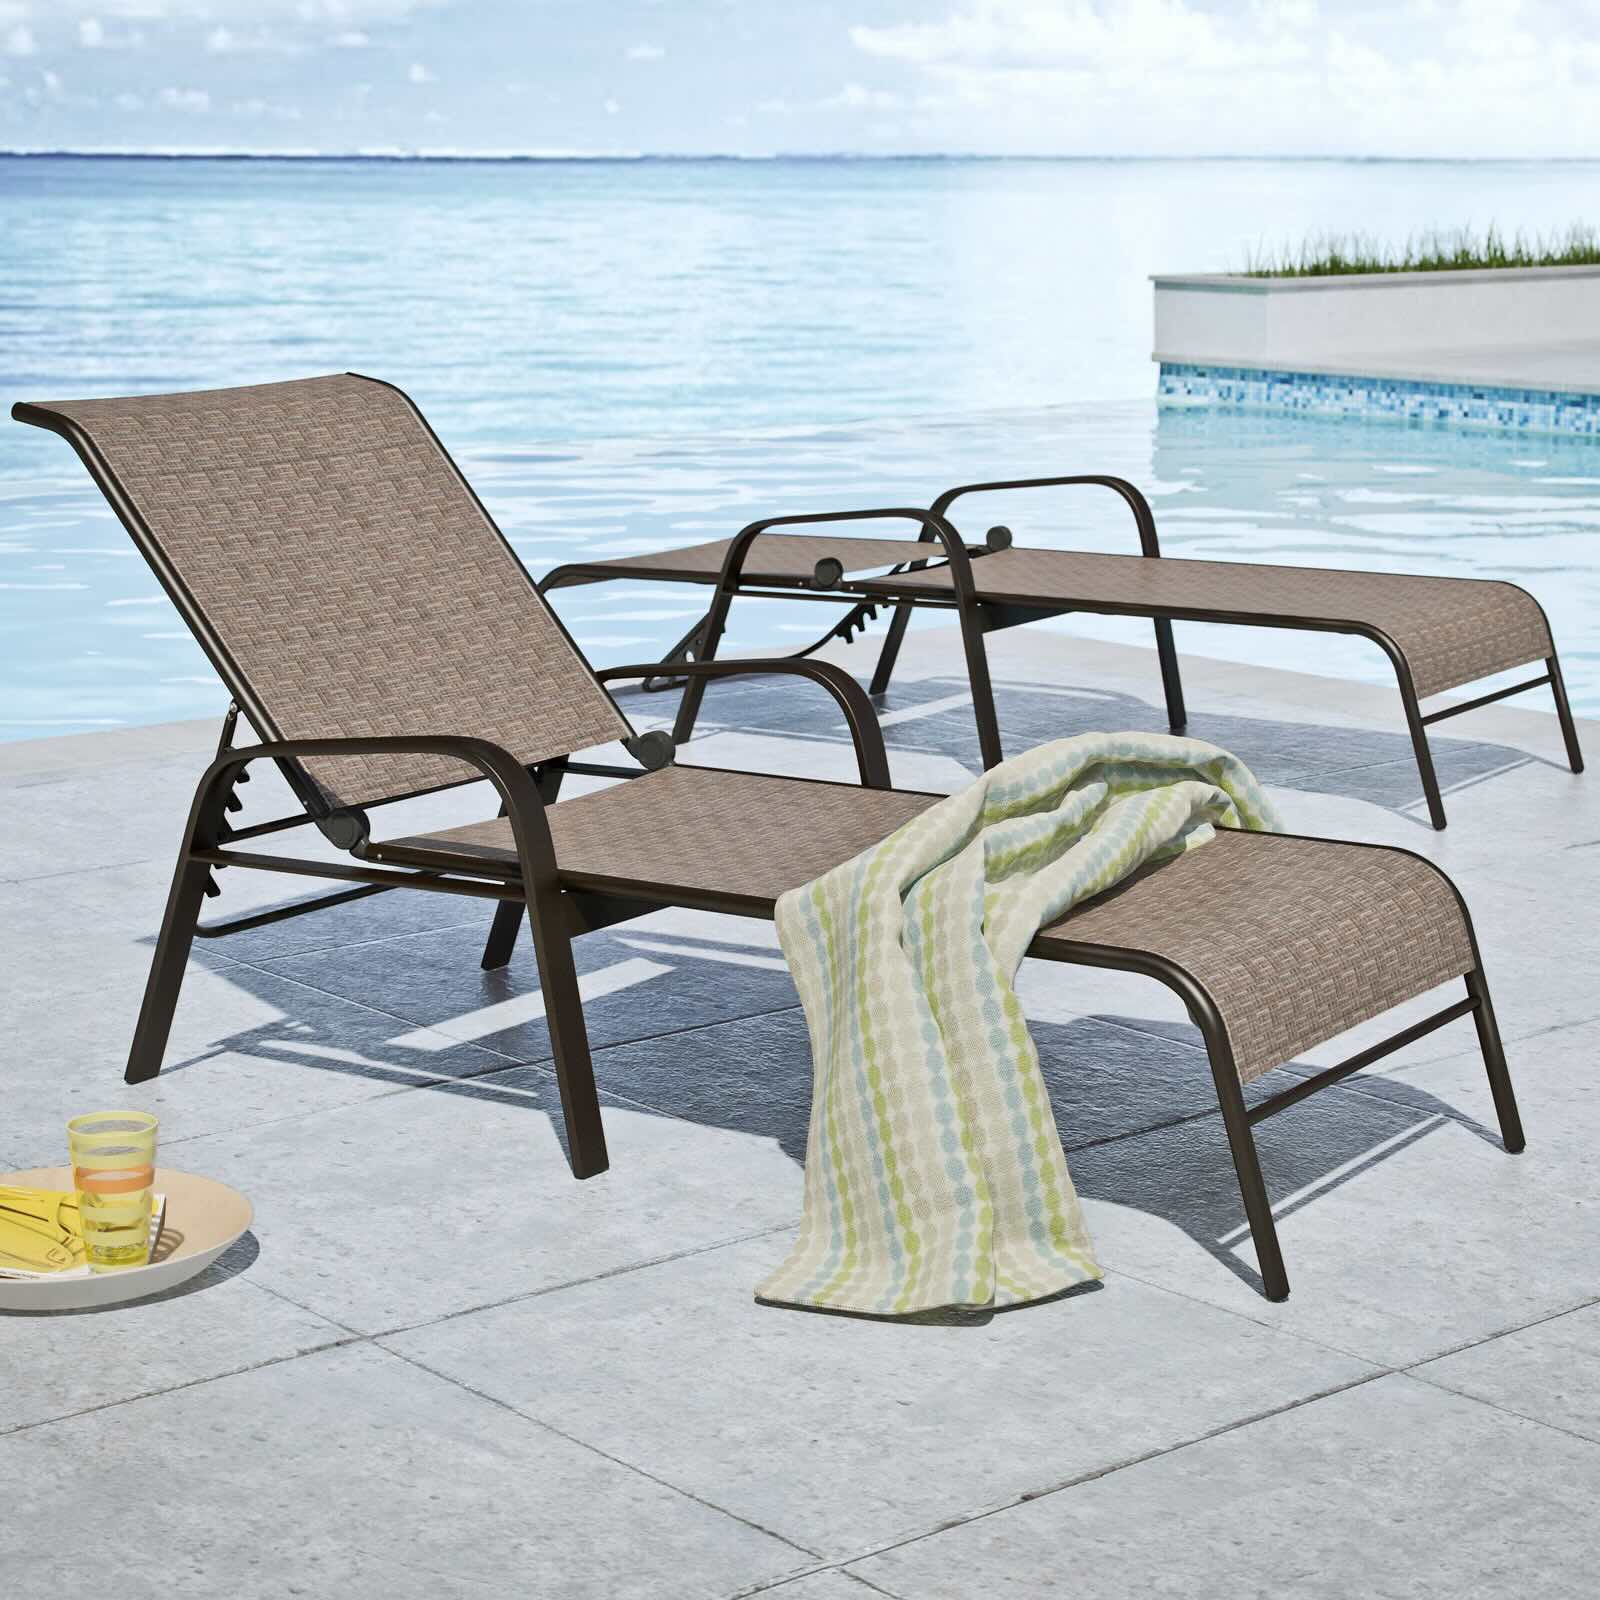 10 Best Patio Chaise Lounge For 2023 1699417627 